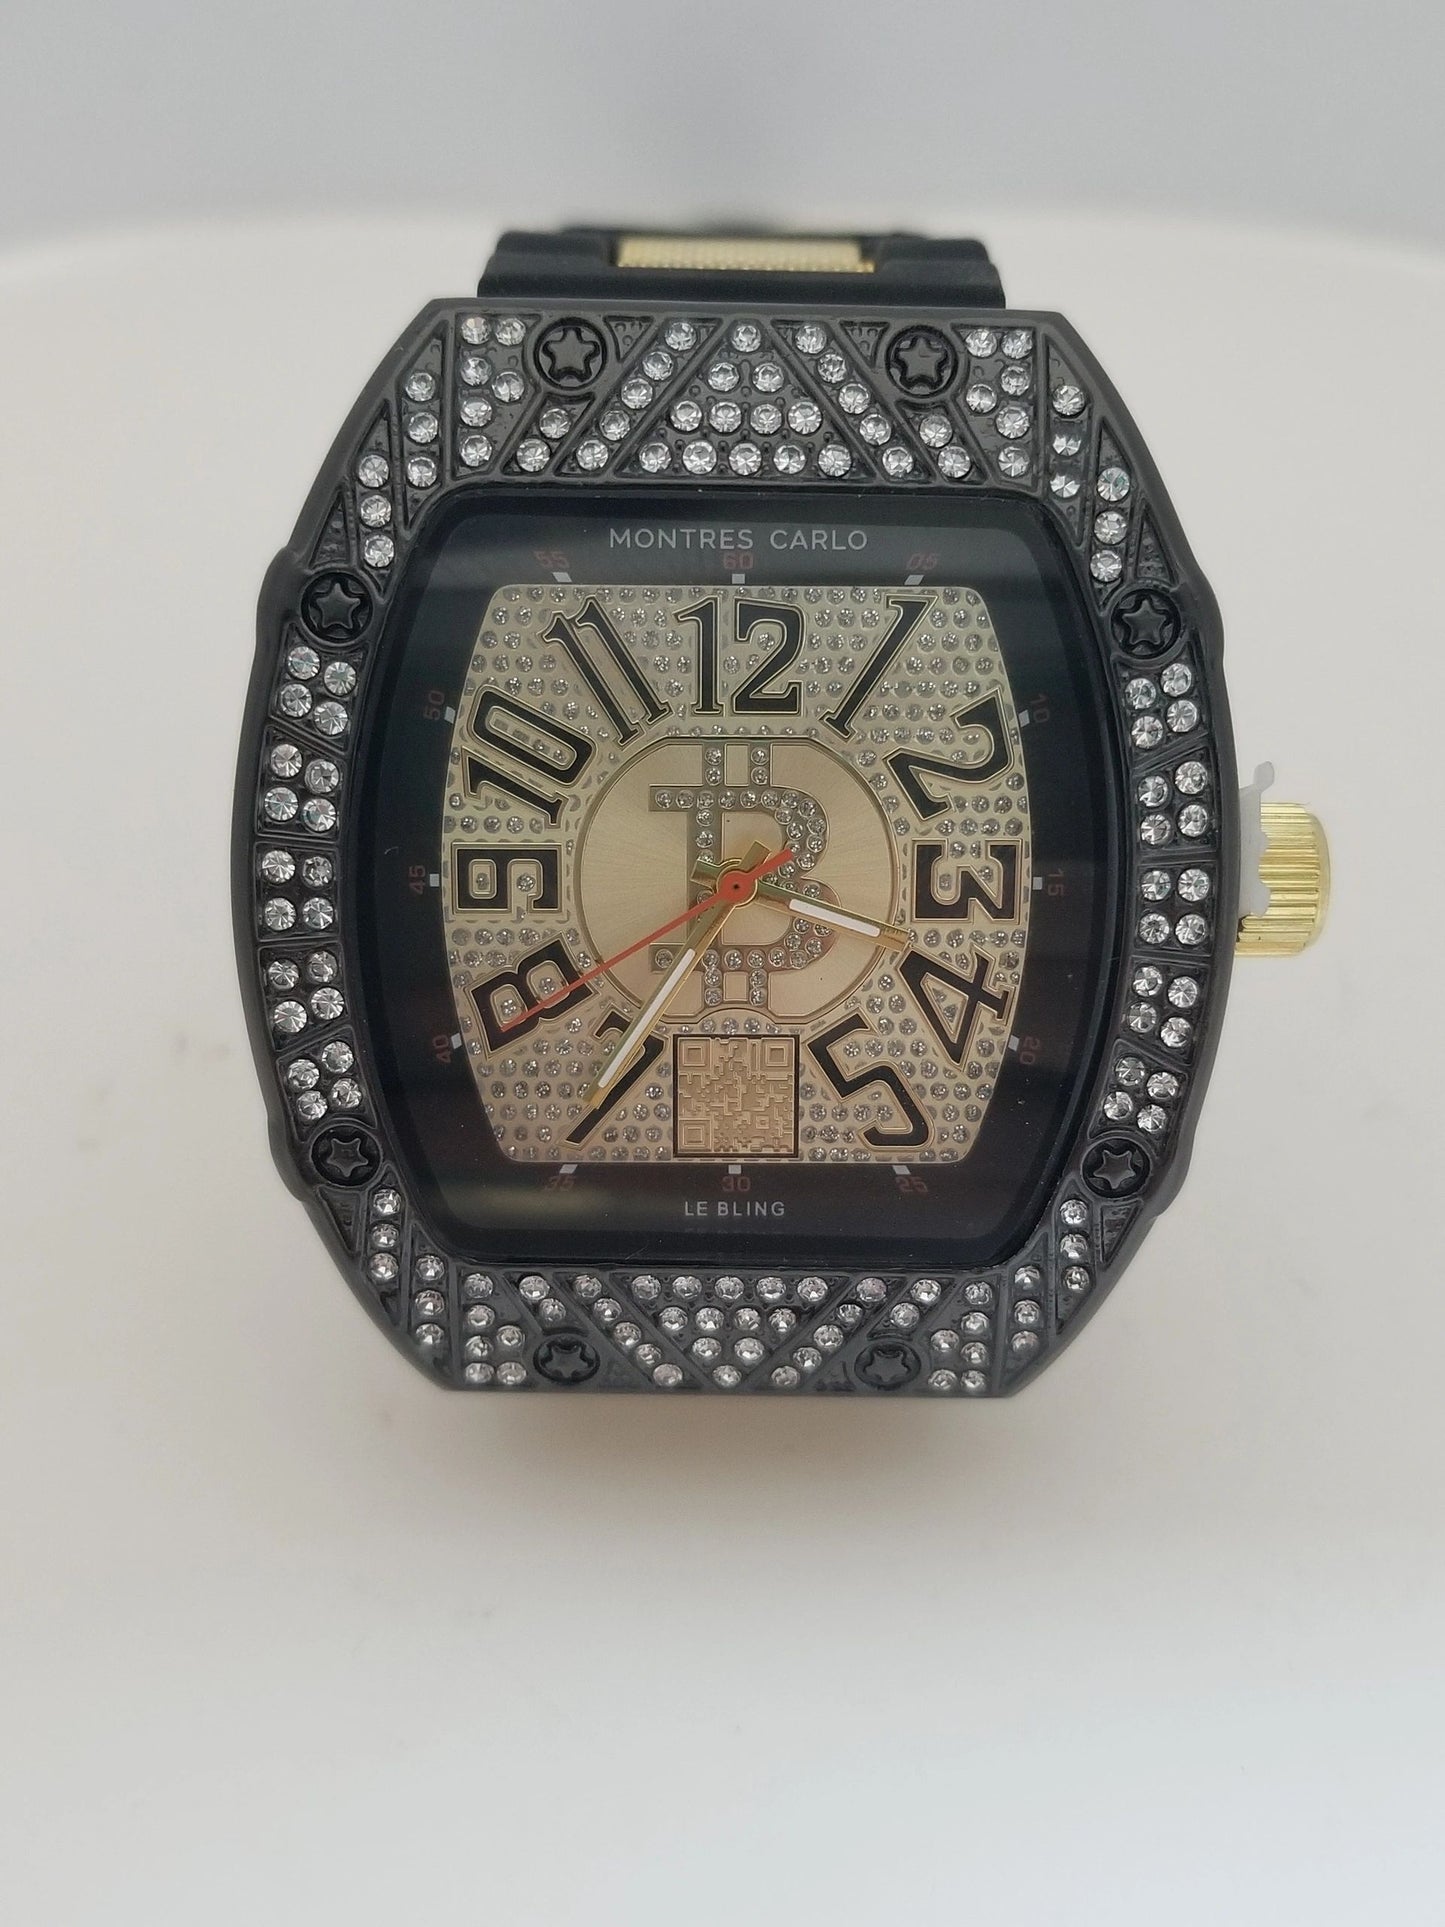 Montres Carlo Stainless Steel/Silicon Jewel Inset Wristwatch